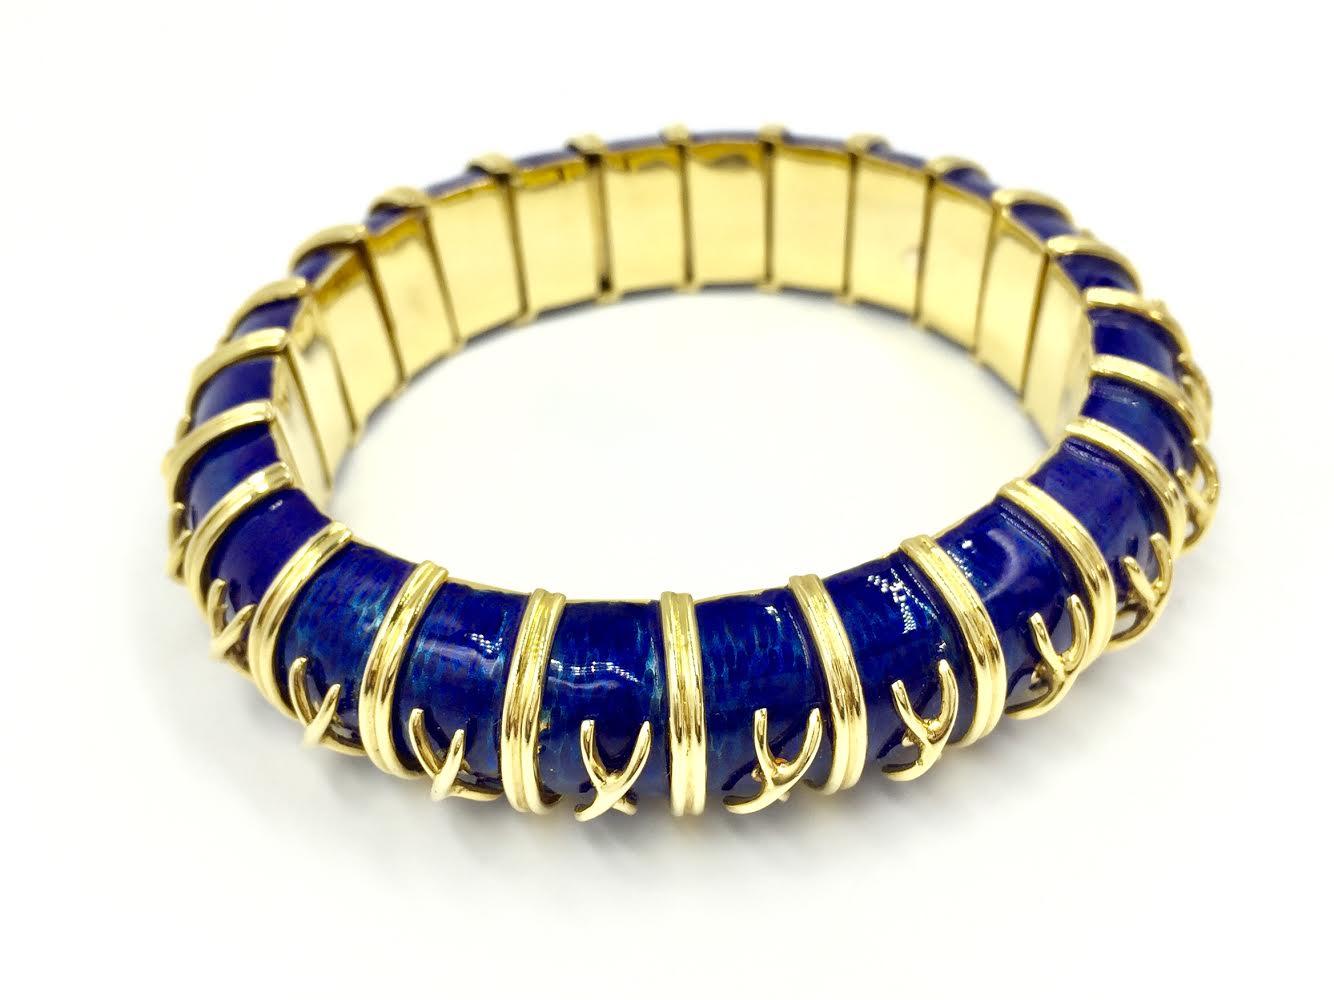 Exquisite bracelet designed by Michael Gates (M. Gates) using vibrant, royal blue enamel with an 18k yellow gold X design on each link. Enamel is in near pristine condition over the entire bracelet. This bracelet is a flexible, slightly domed bangle